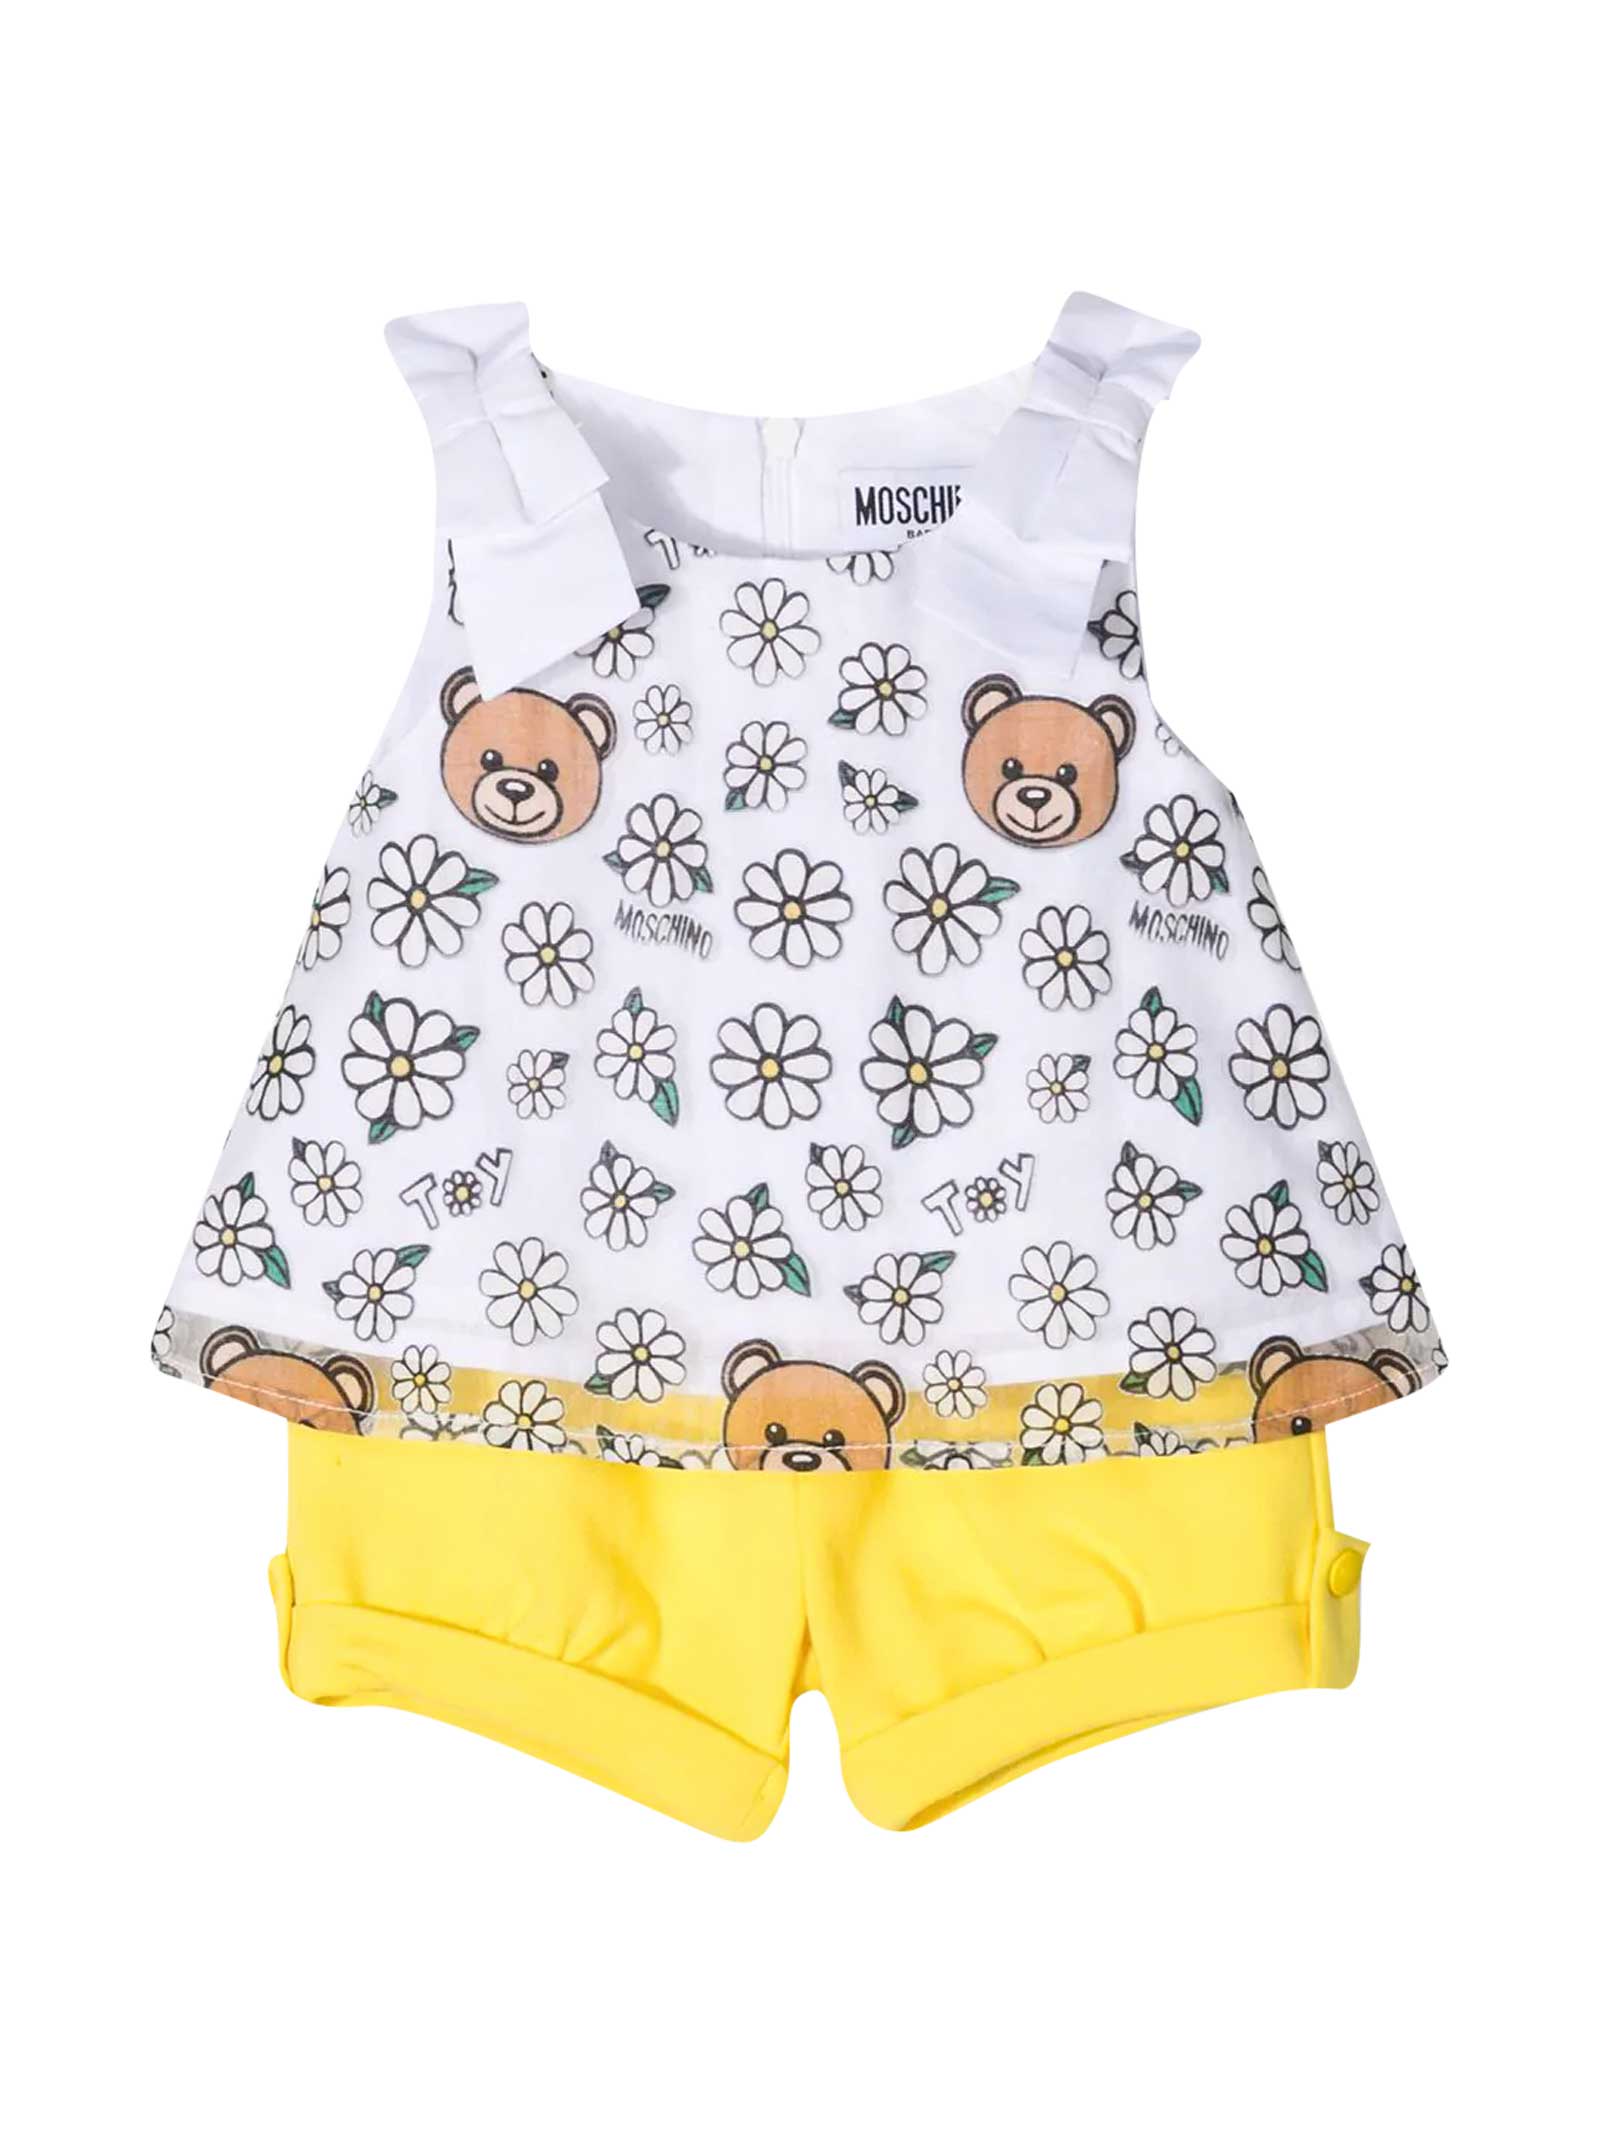 Moschino Babies' Newborn Outfit In Bianco